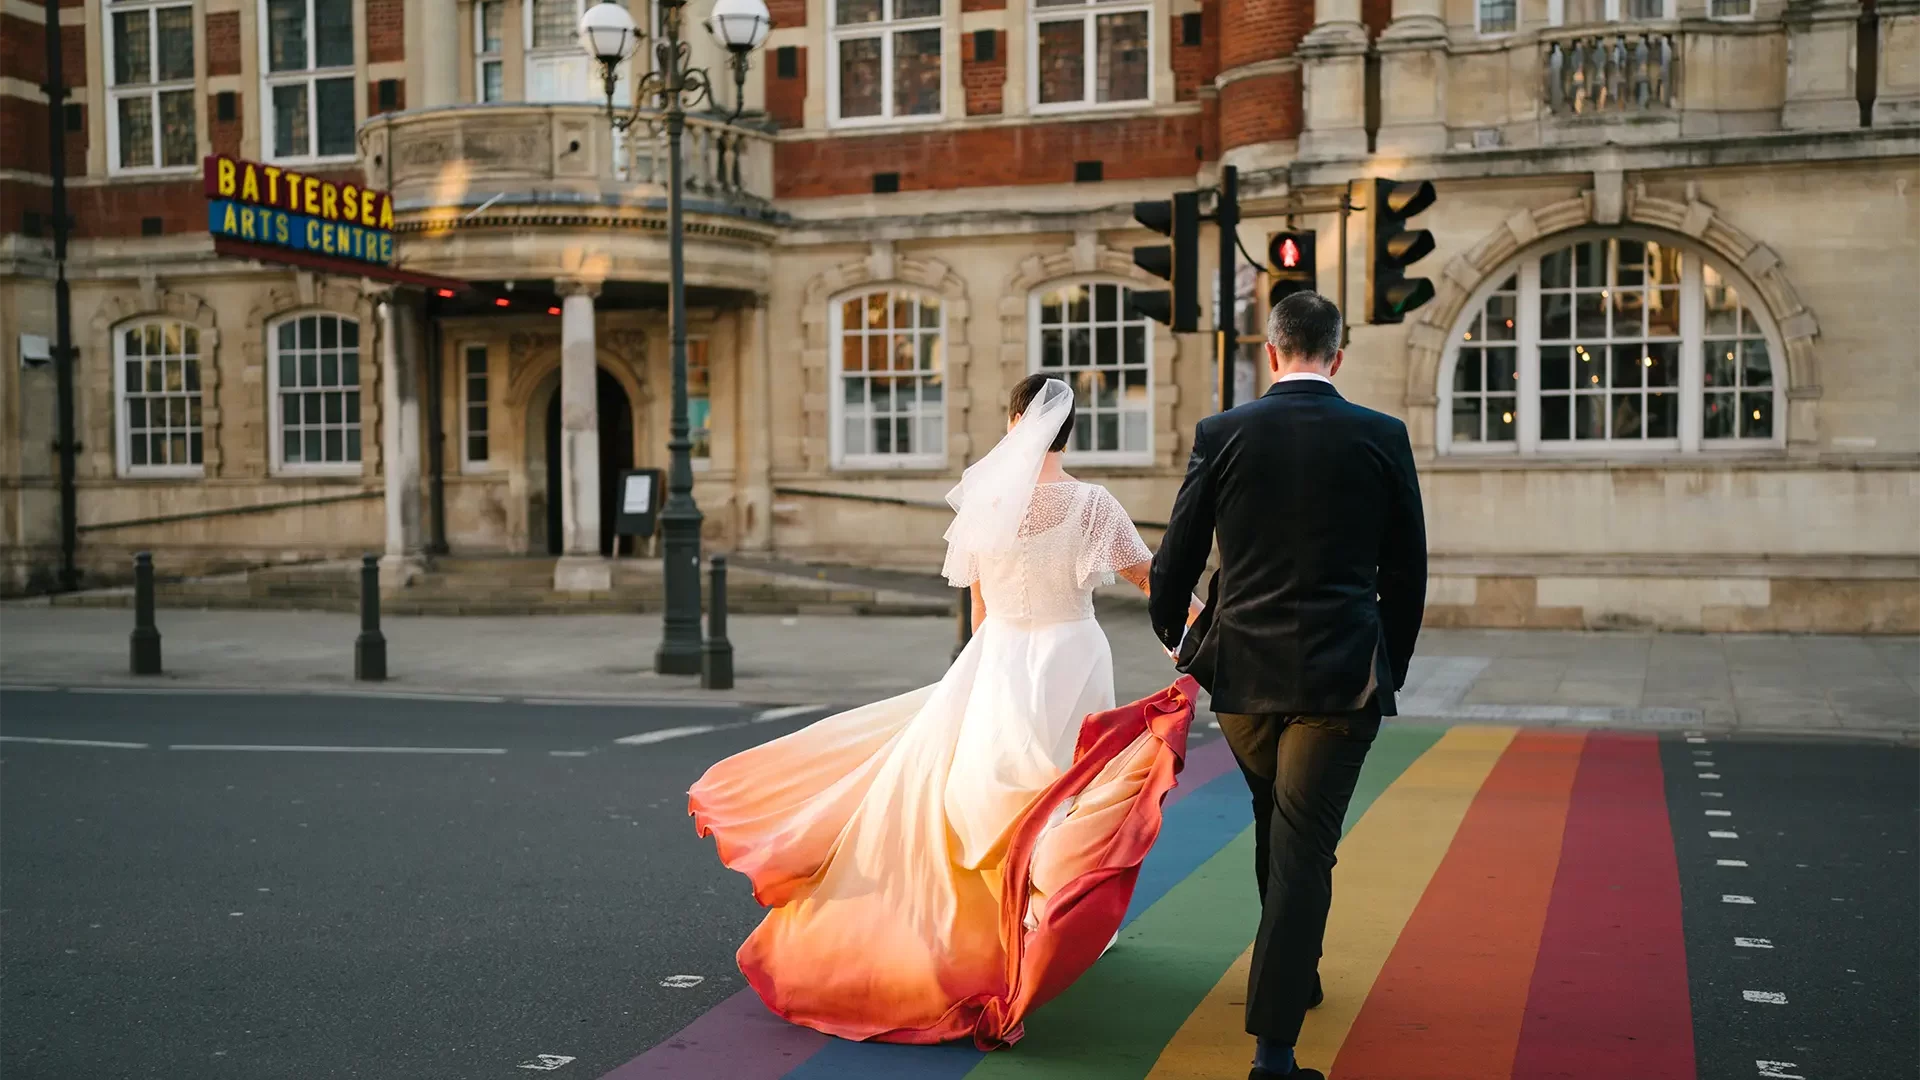 Alexis & Rick walking over rainbow crossing to Battersea Art Centre - Photography by Kari Bellamy